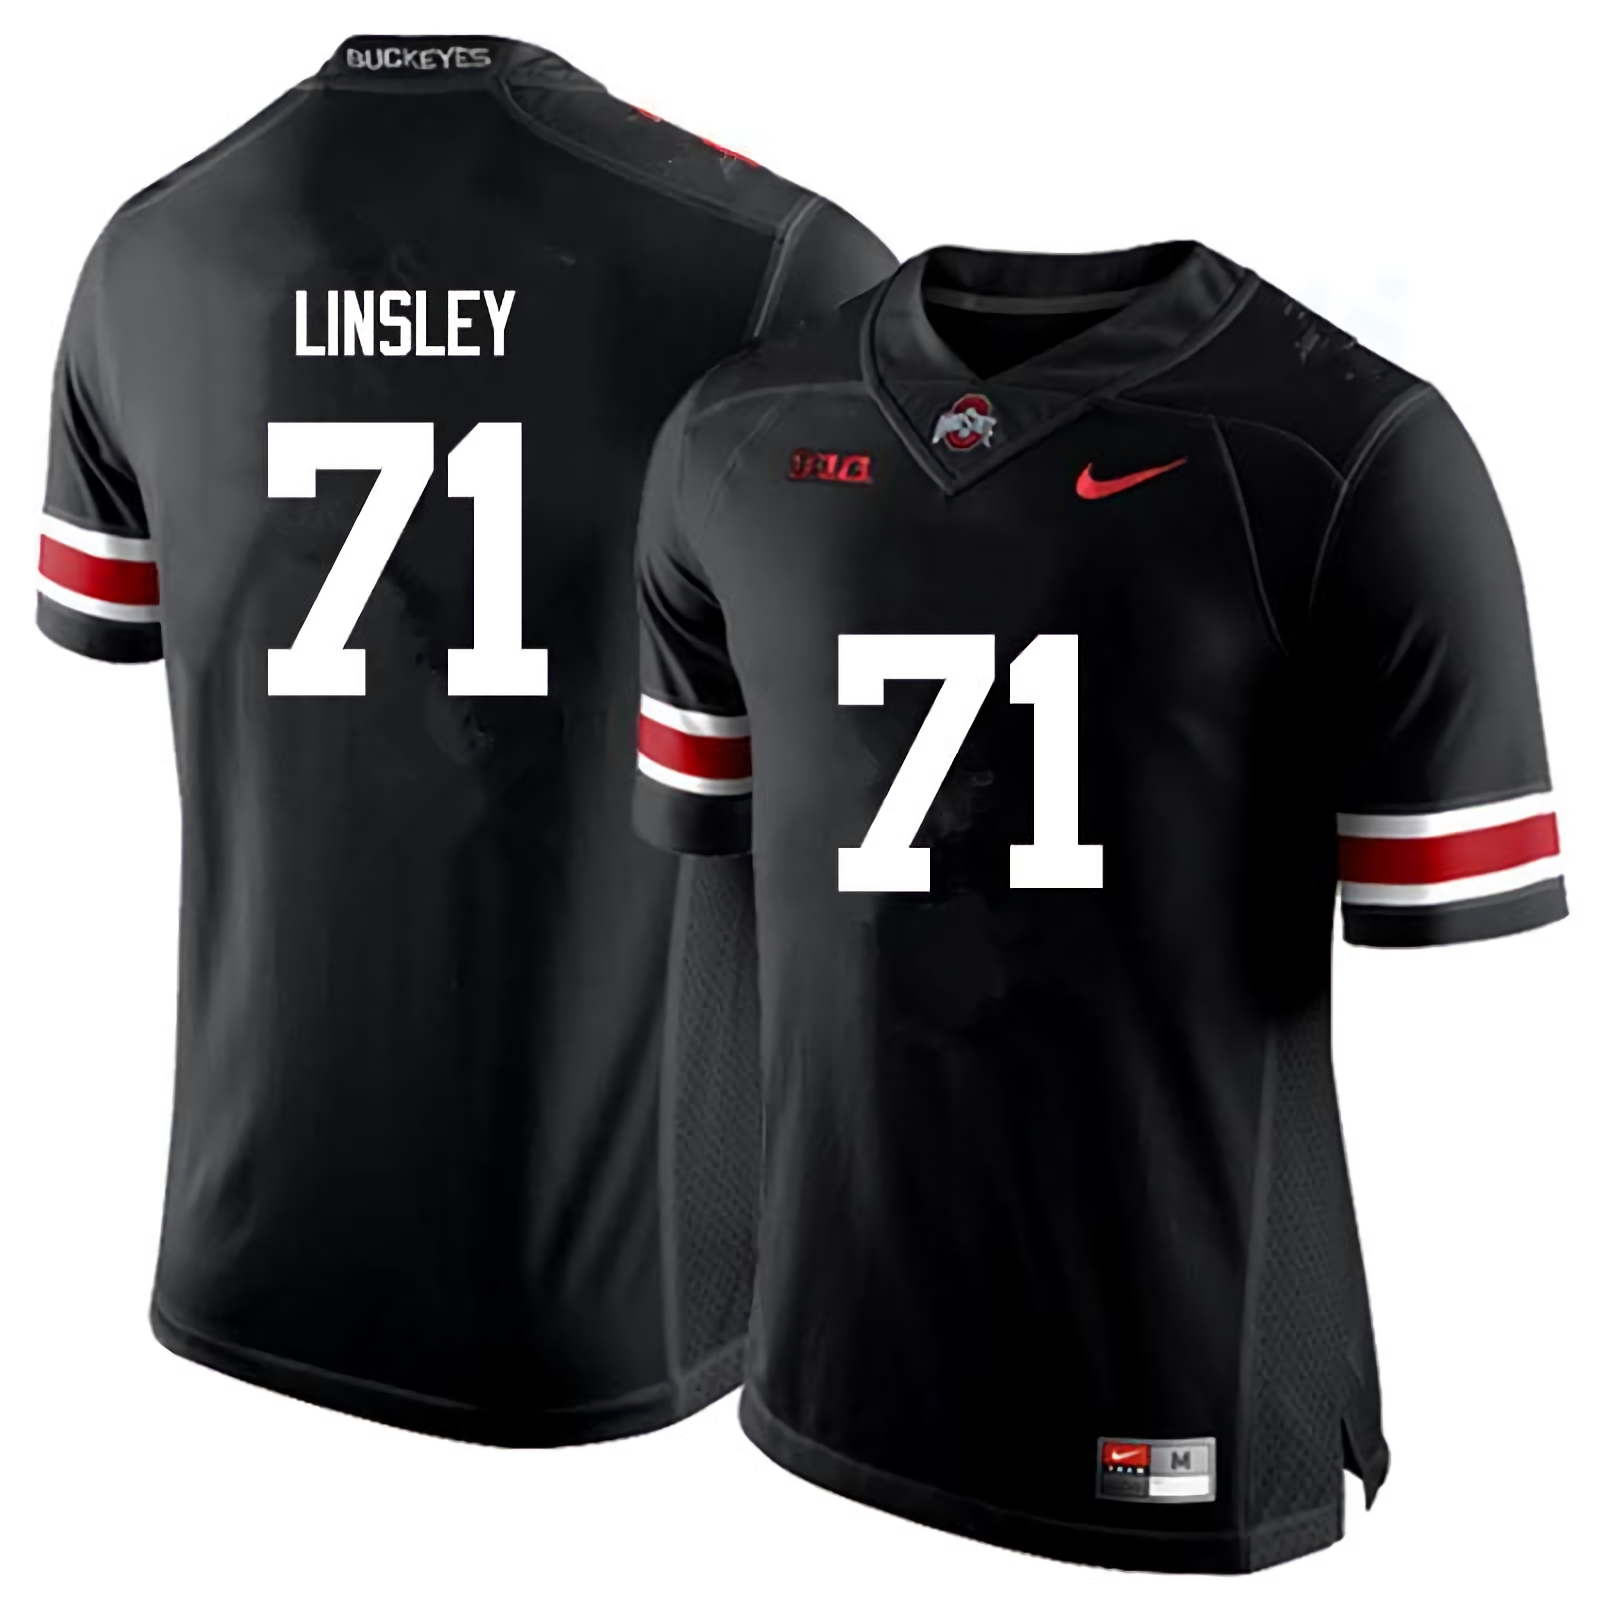 Corey Linsley Ohio State Buckeyes Men's NCAA #71 Nike Black College Stitched Football Jersey DTV3256TY